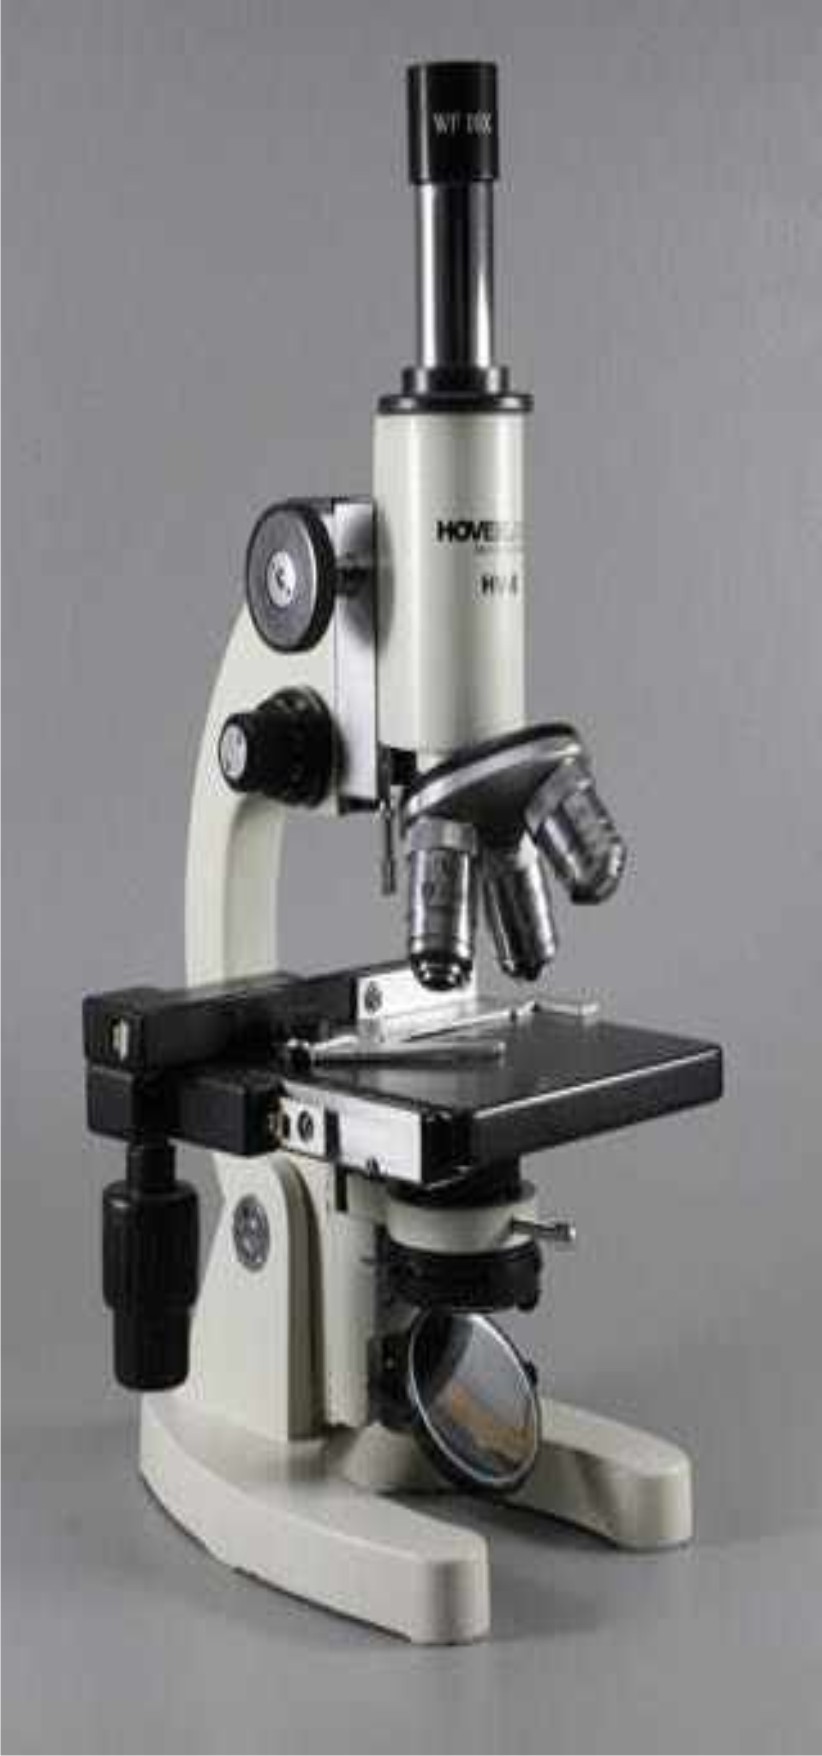 controller/assets/products_upload/Medical Microscope, Model No.: KI - 2146